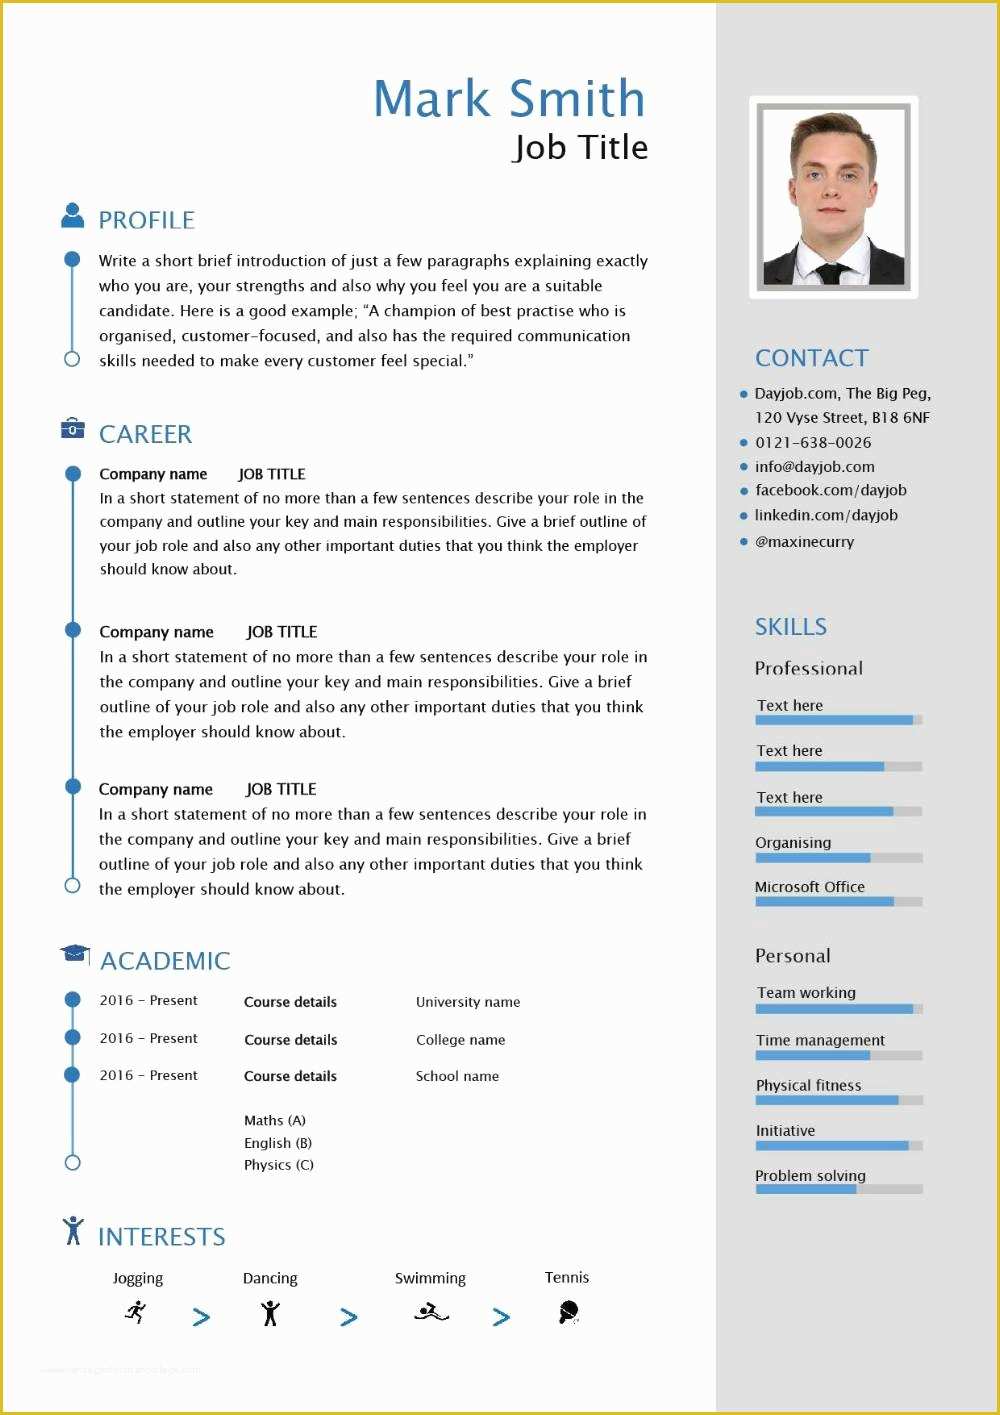 View Free Resume Templates Of Free Able Cv Template Examples Career Advice How